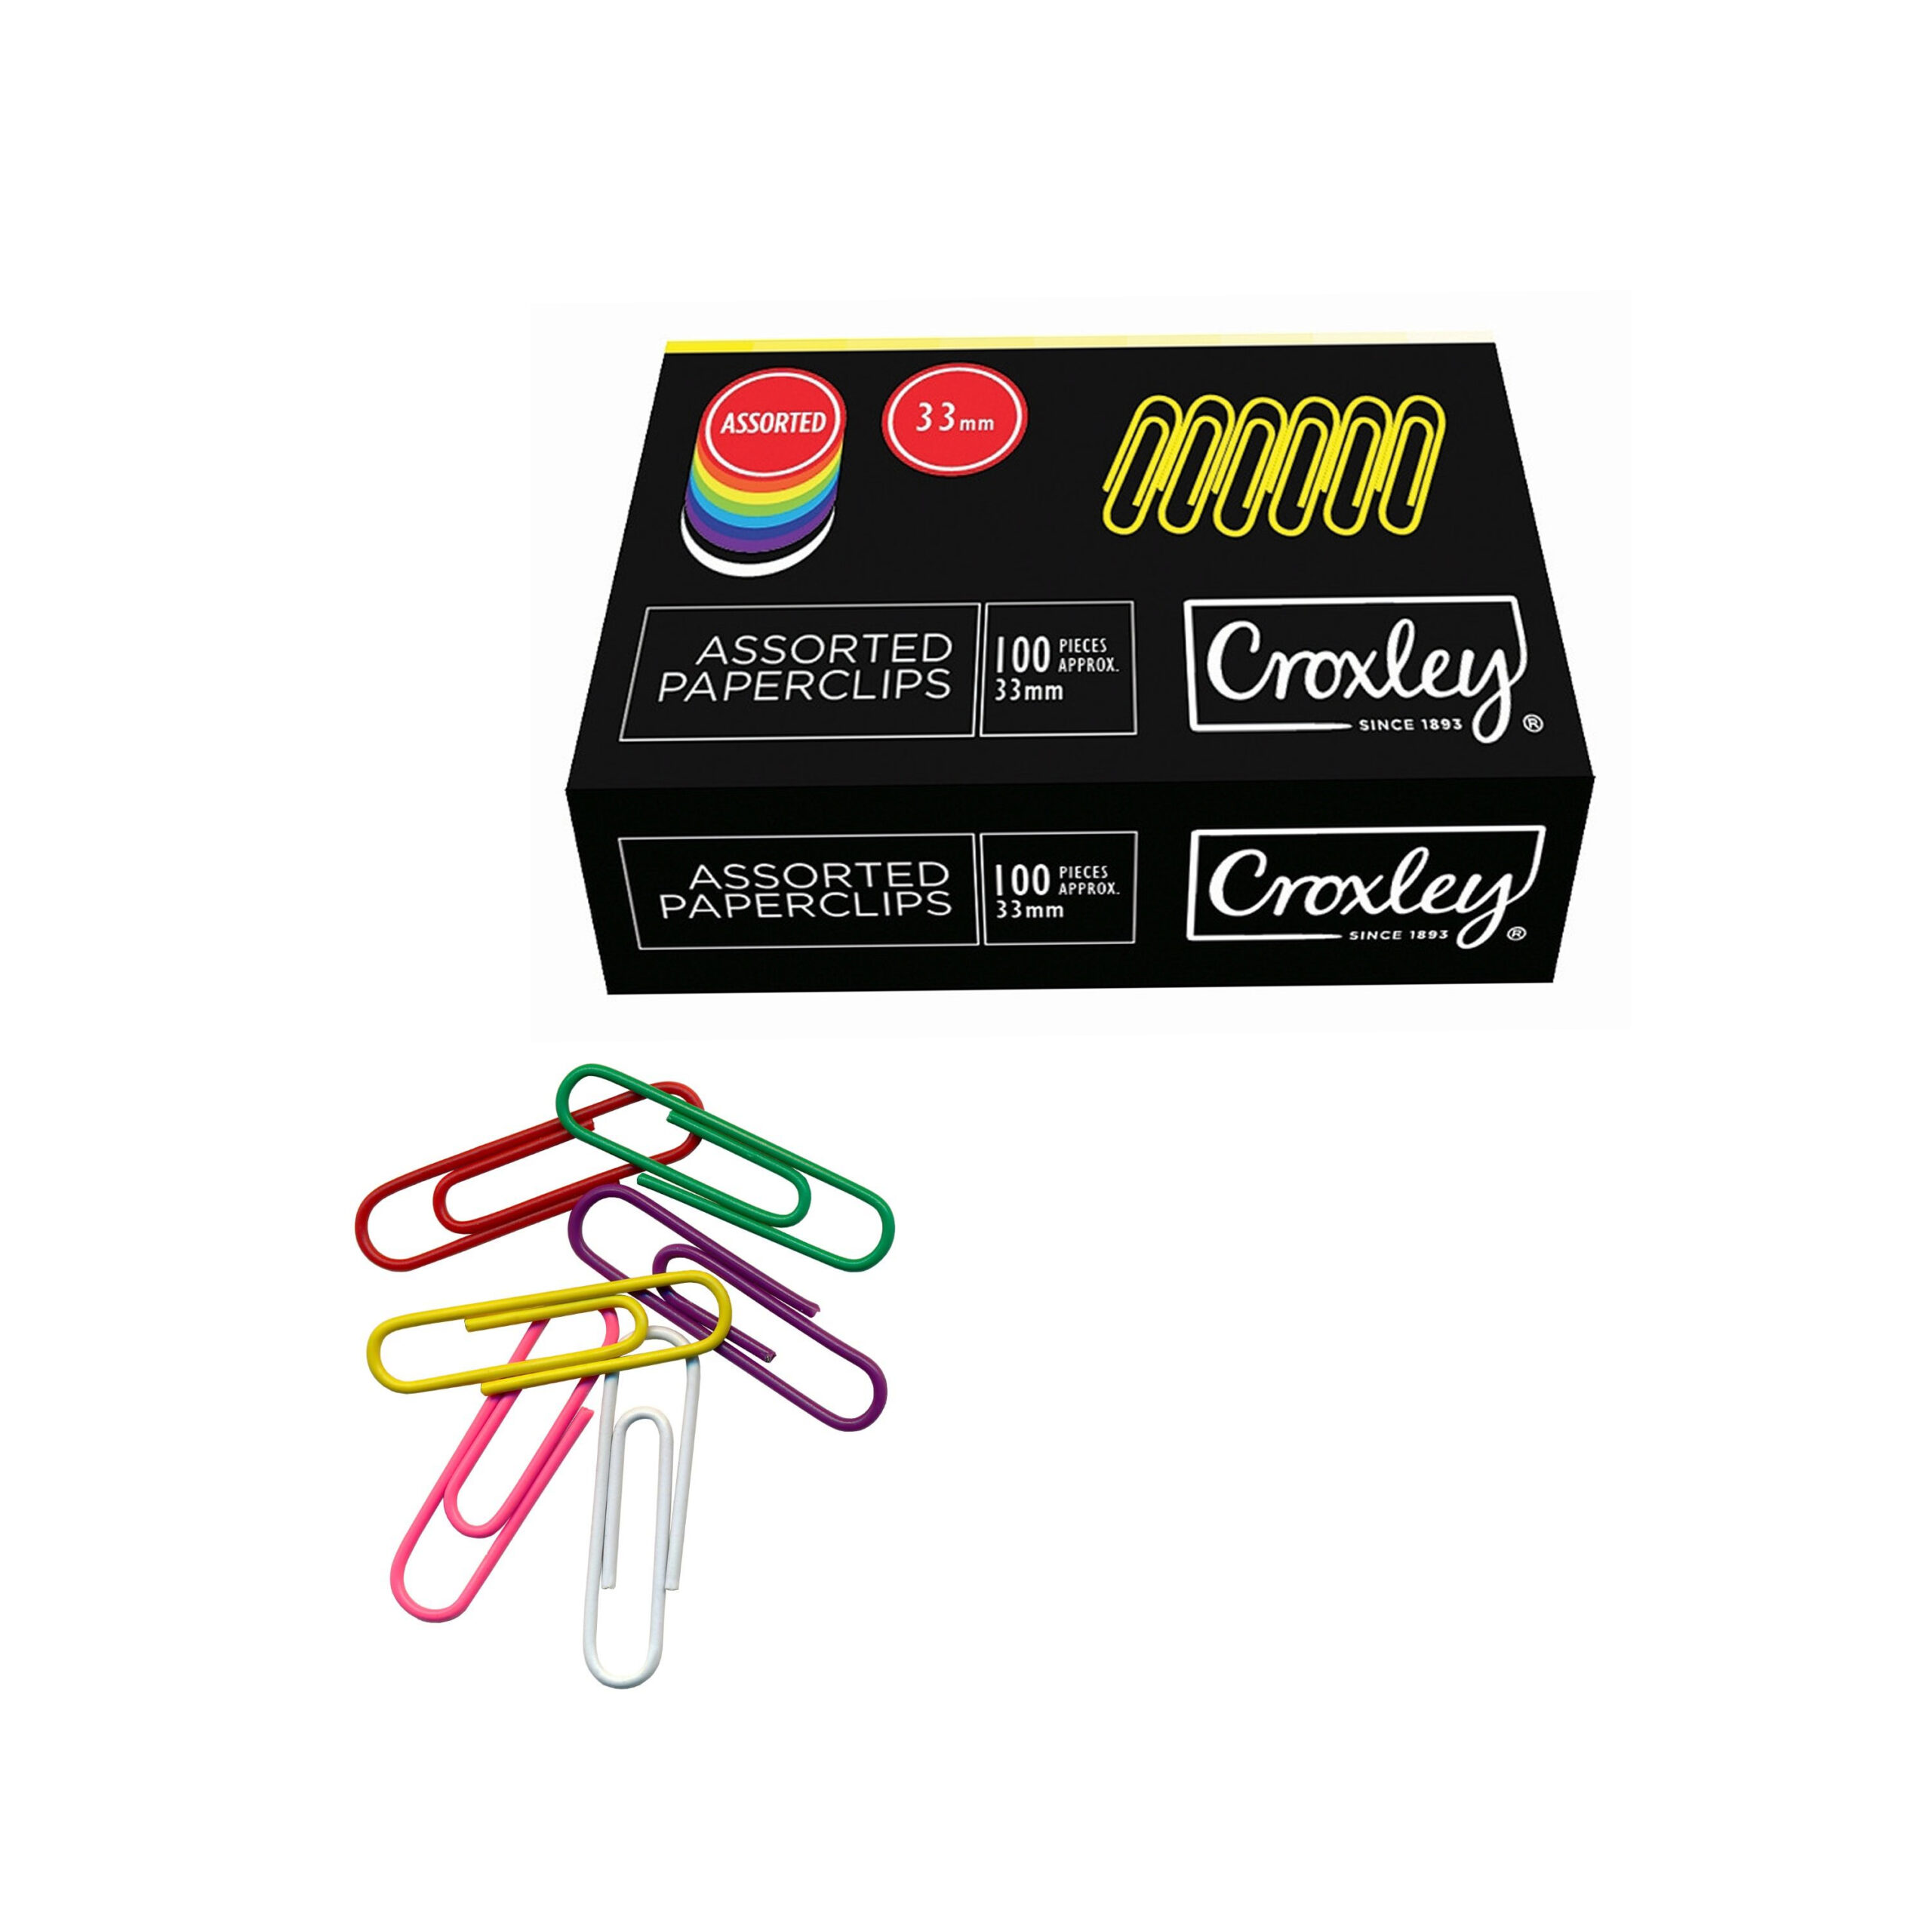 CROXLEY PAPER
CLIPS ASSORTED
33mm (1x100)